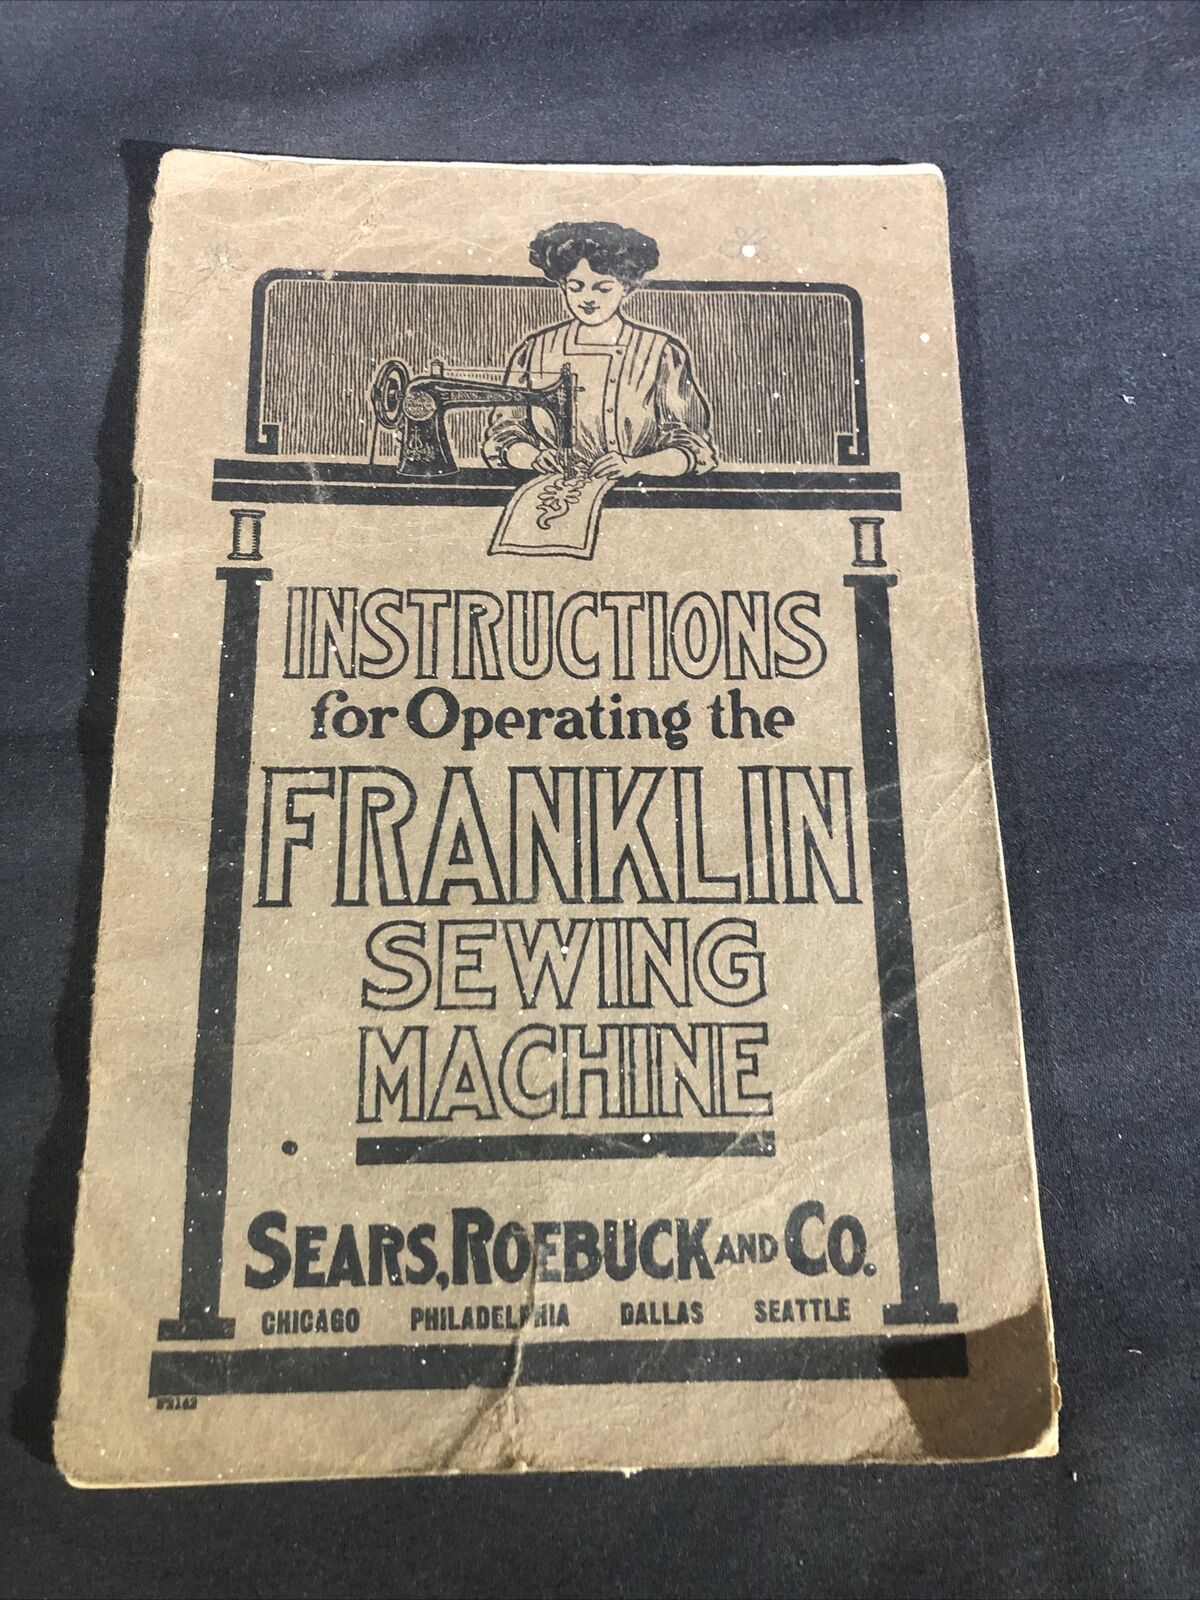 Franklin Sewing Machine Instruction Manual Sears Roebuck & Co 1922